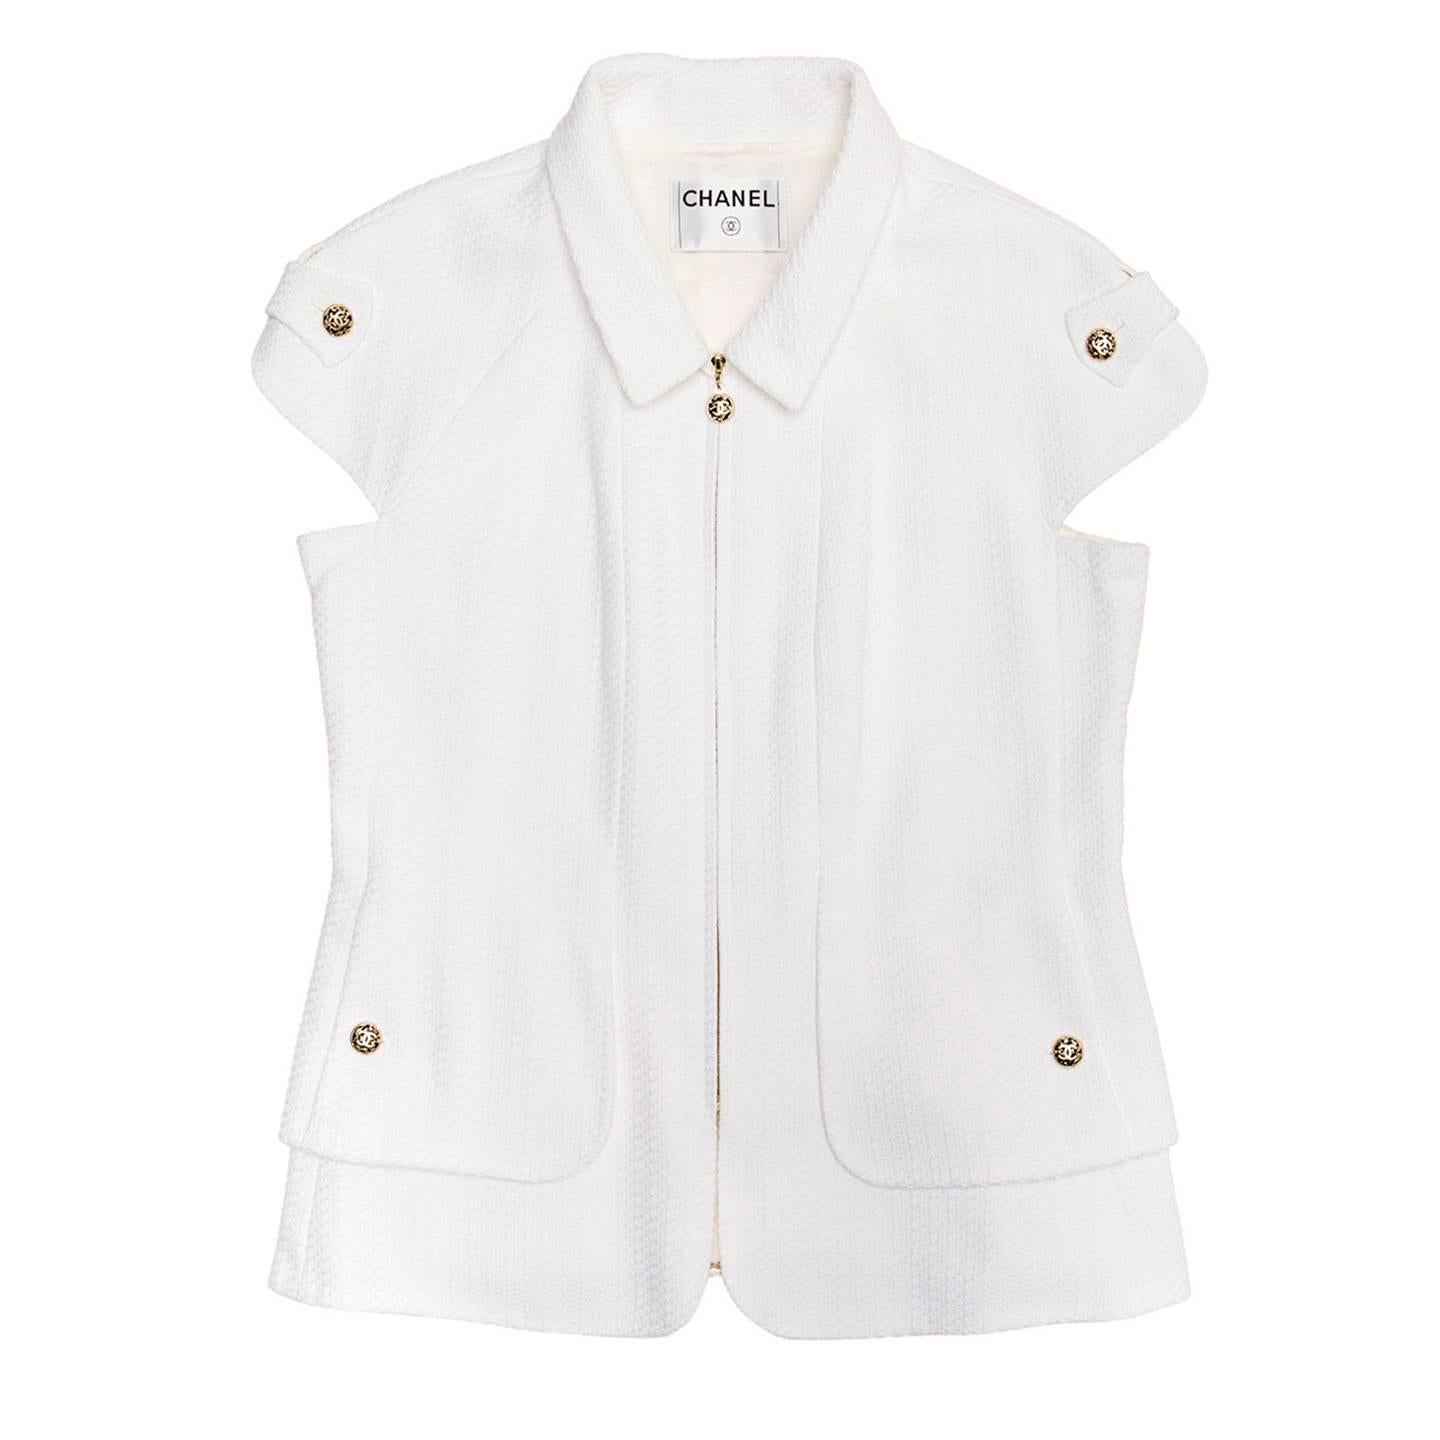 WHite thick pique cotton jacket with a peter pan collar and cap sleeves enriched by a rounded slit and a self-fabric strap attached with brushed gold Chanel buttons. The hem has two layers rounded at front, two slit pockets sit on the shorter one